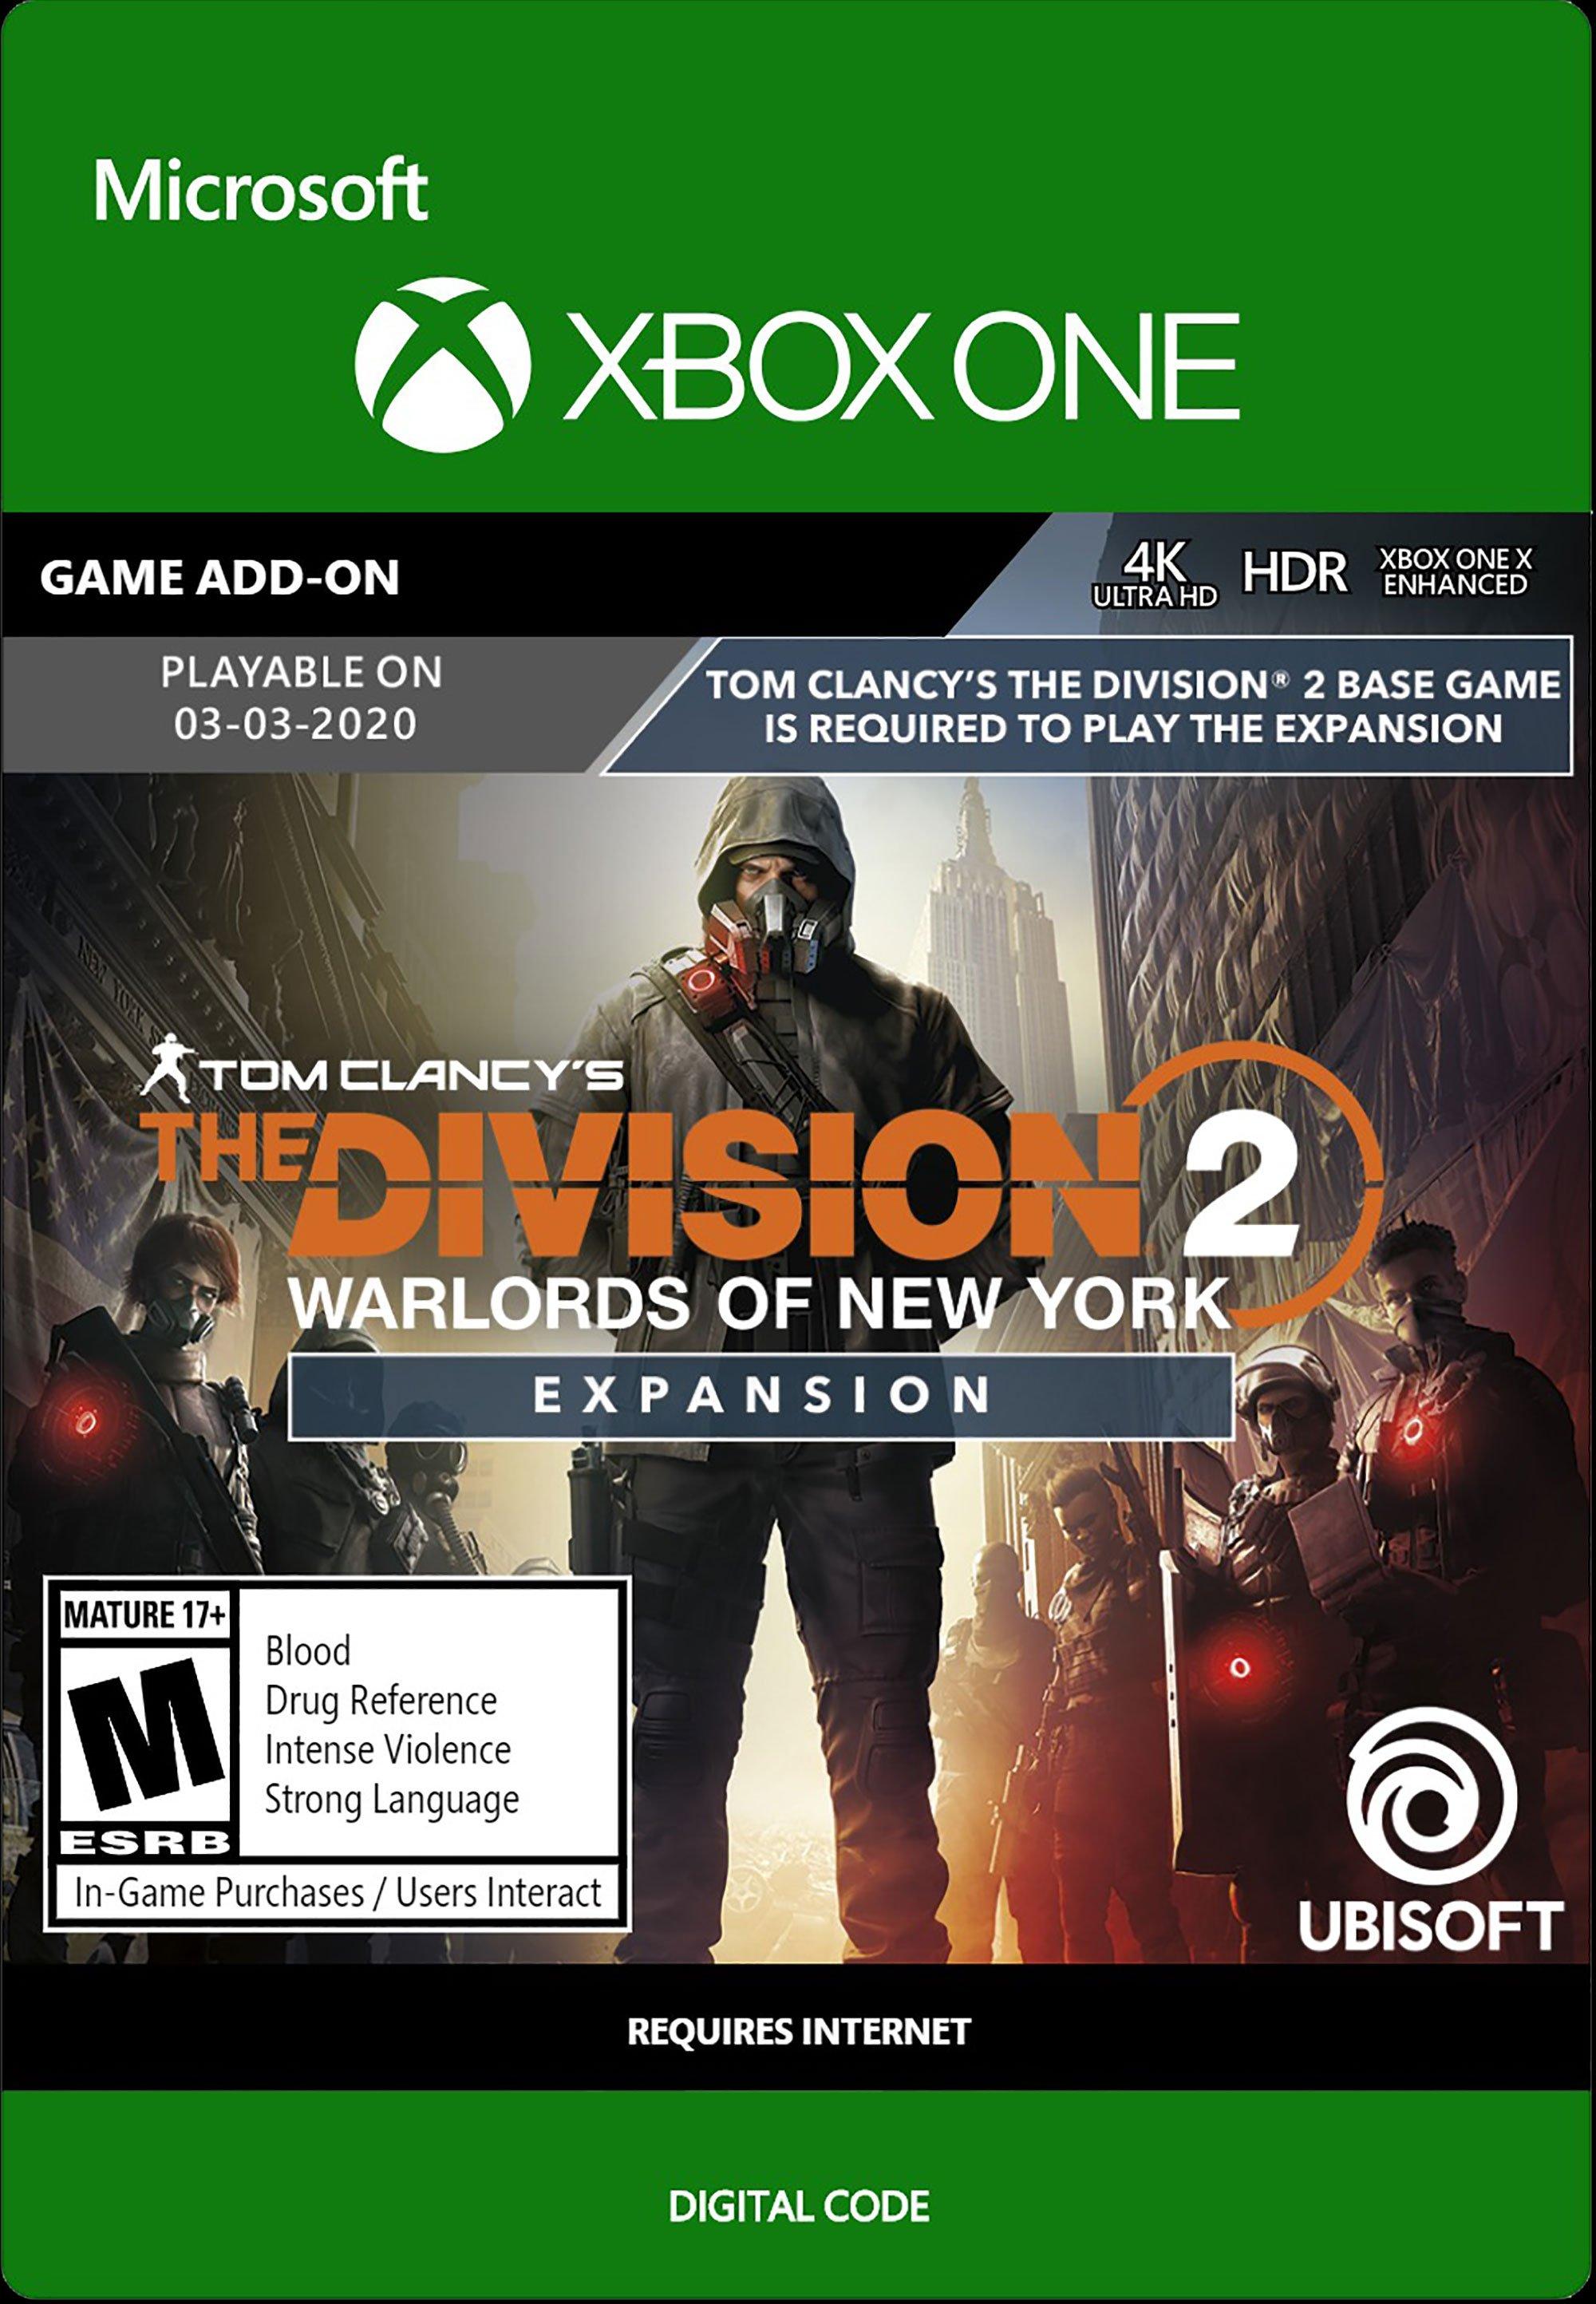 the division 2 xbox one digital